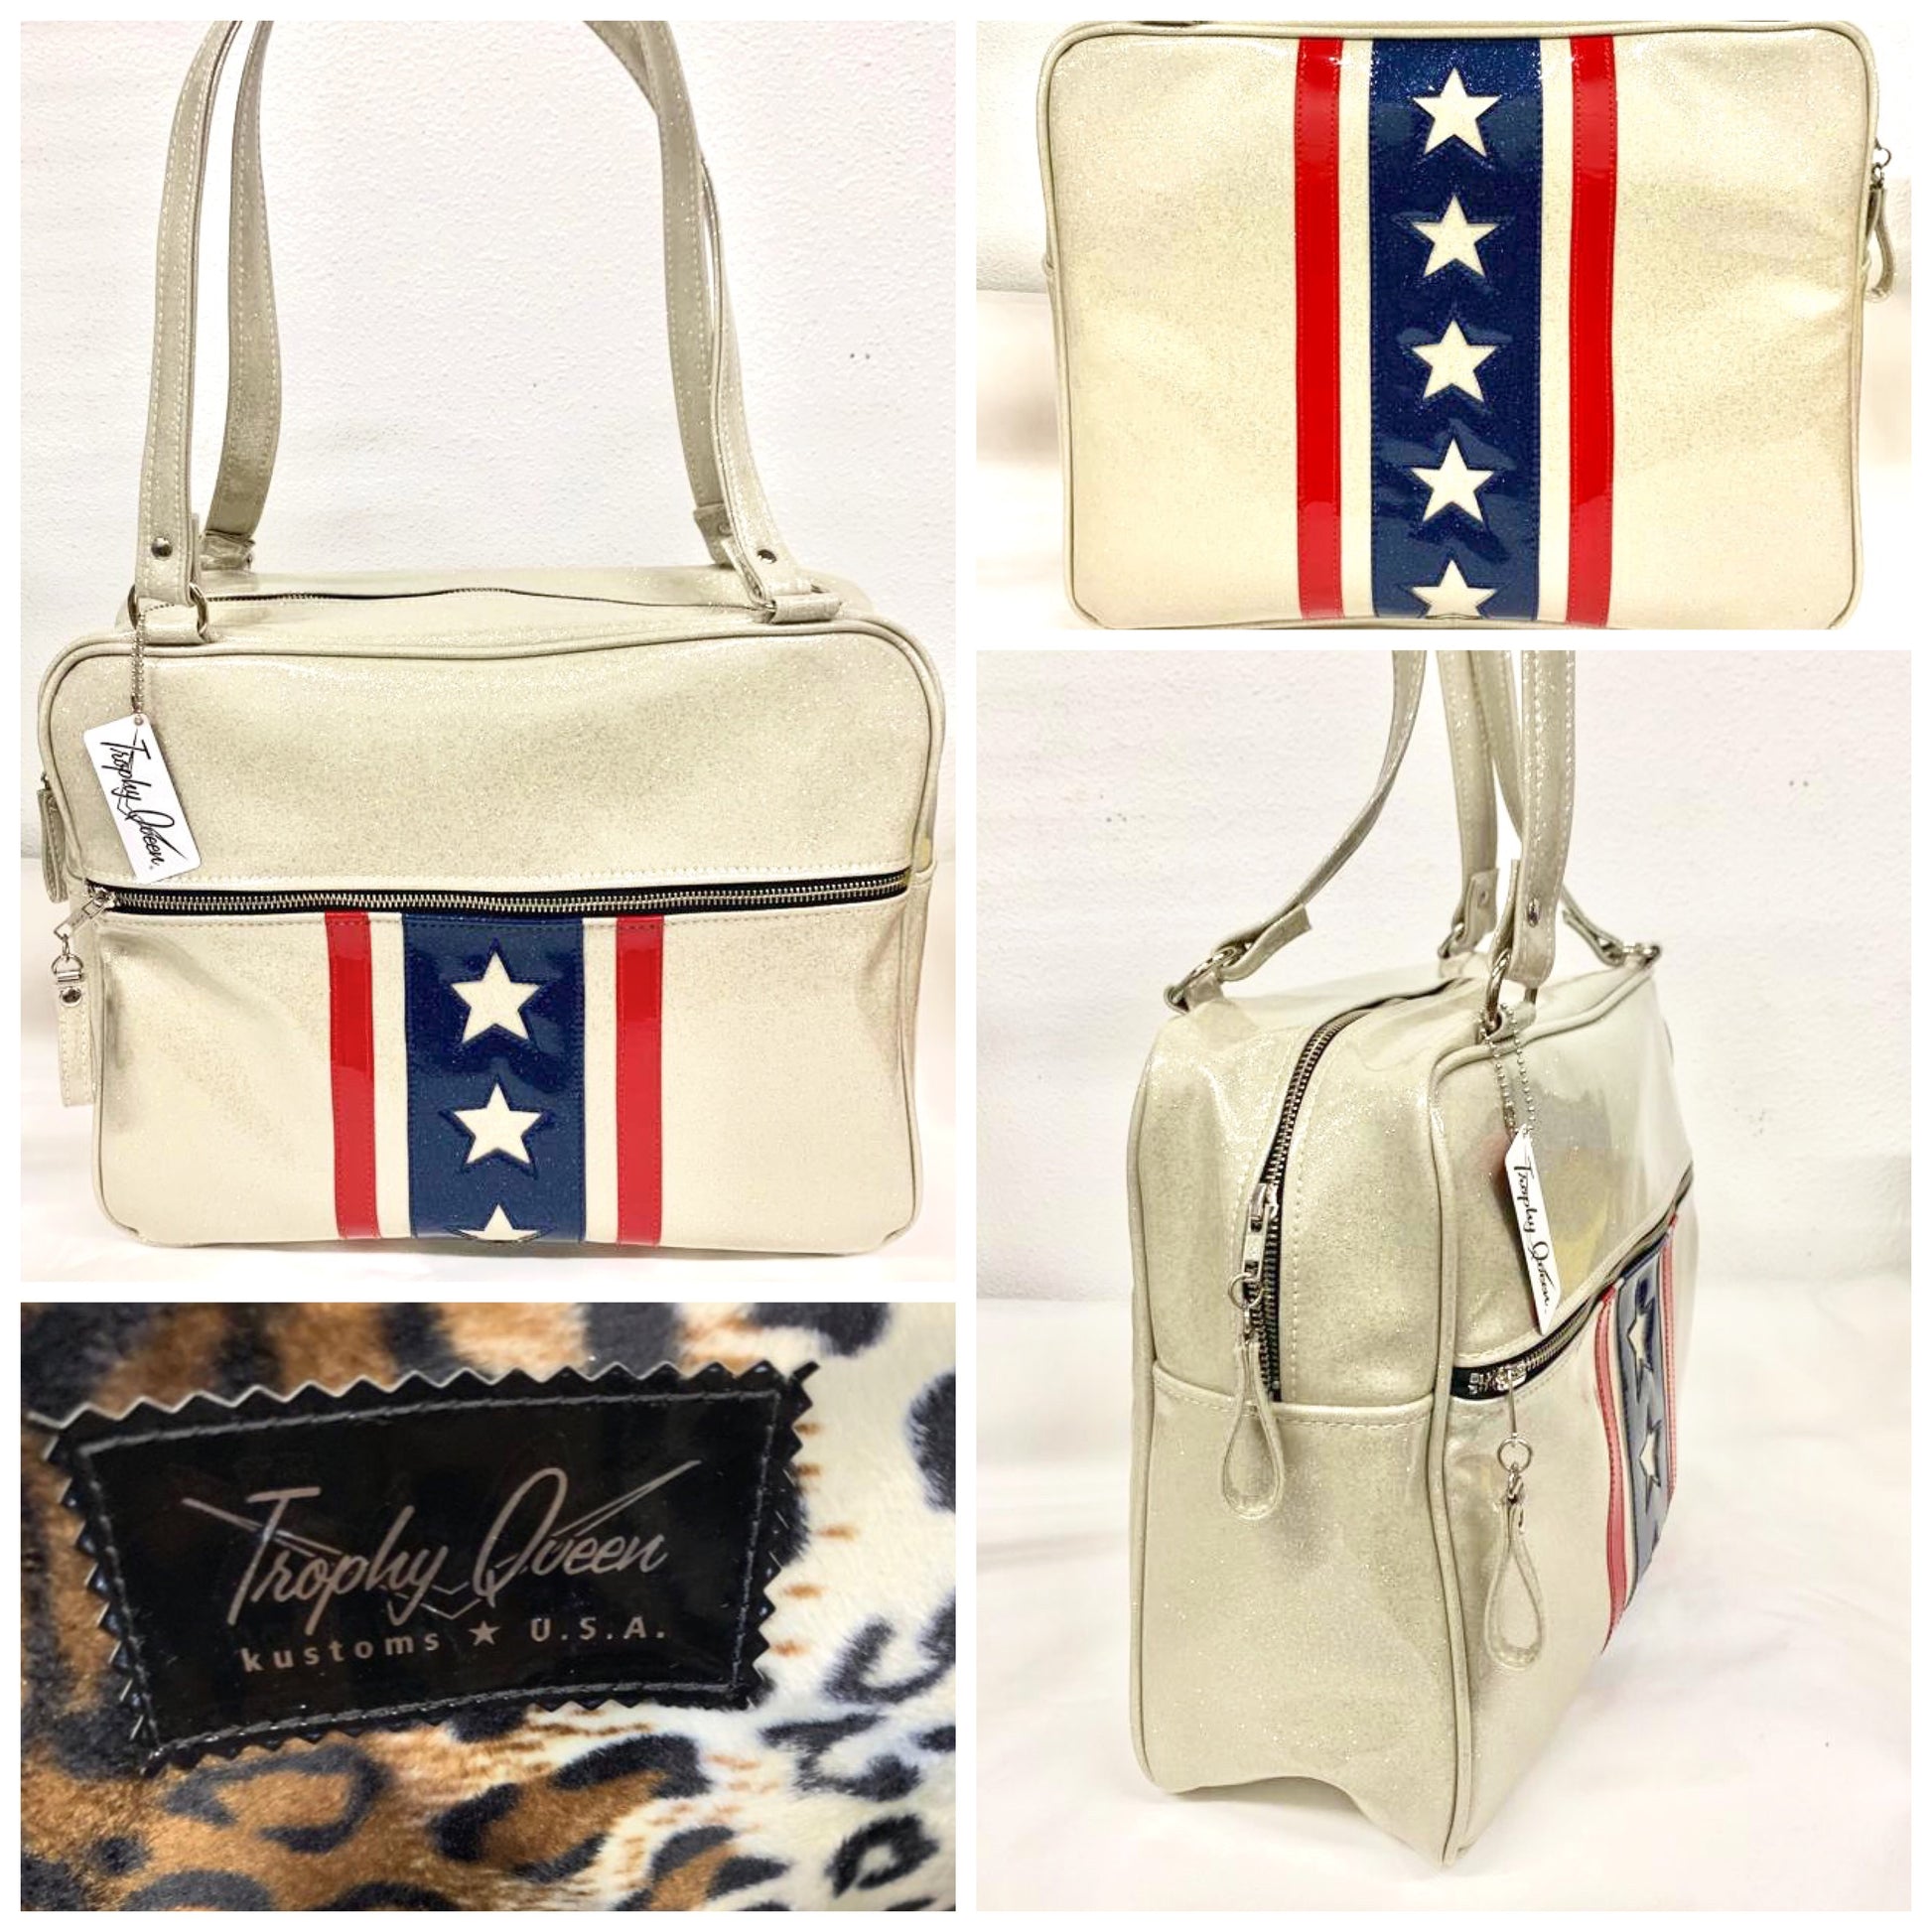 Evel Knievel GTO Business Bag with plush leopard lining, 29” straps with nickel hardware and comes with extra replacement straps! Inside has an open divided pocket and zipper pocket with hidden serial number. Tote comes with vinyl zipper pull, nickel fee and signature Trophy Queen label. Made with love in California.